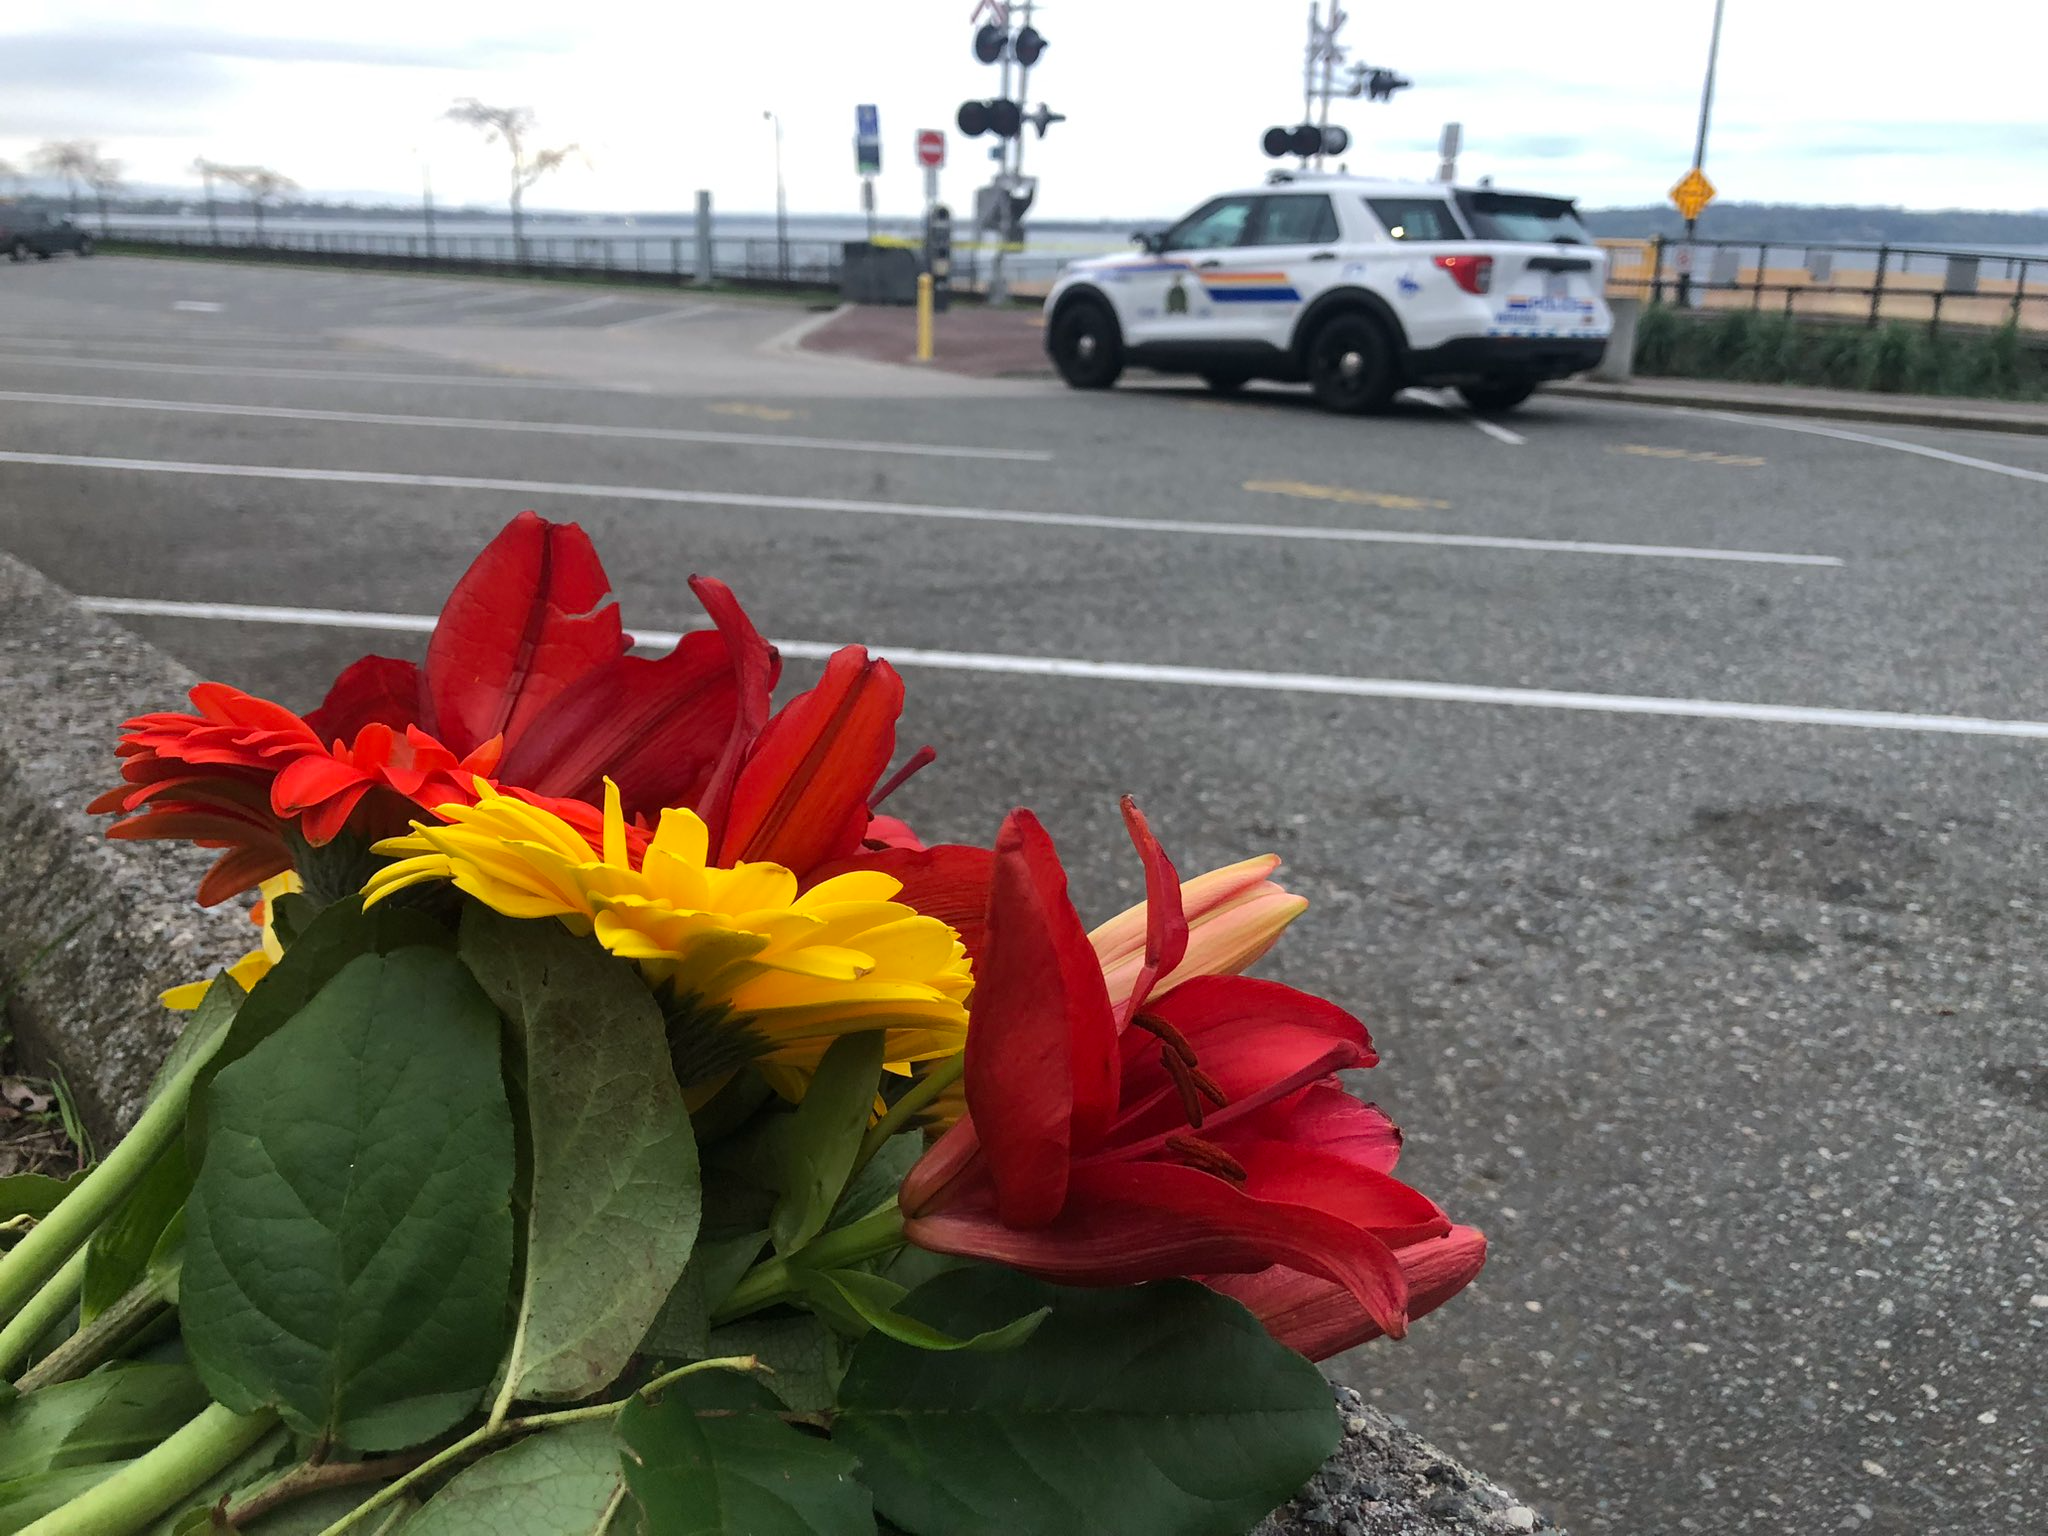 Man arrested in deadly White Rock Promenade stabbing that shocked
community